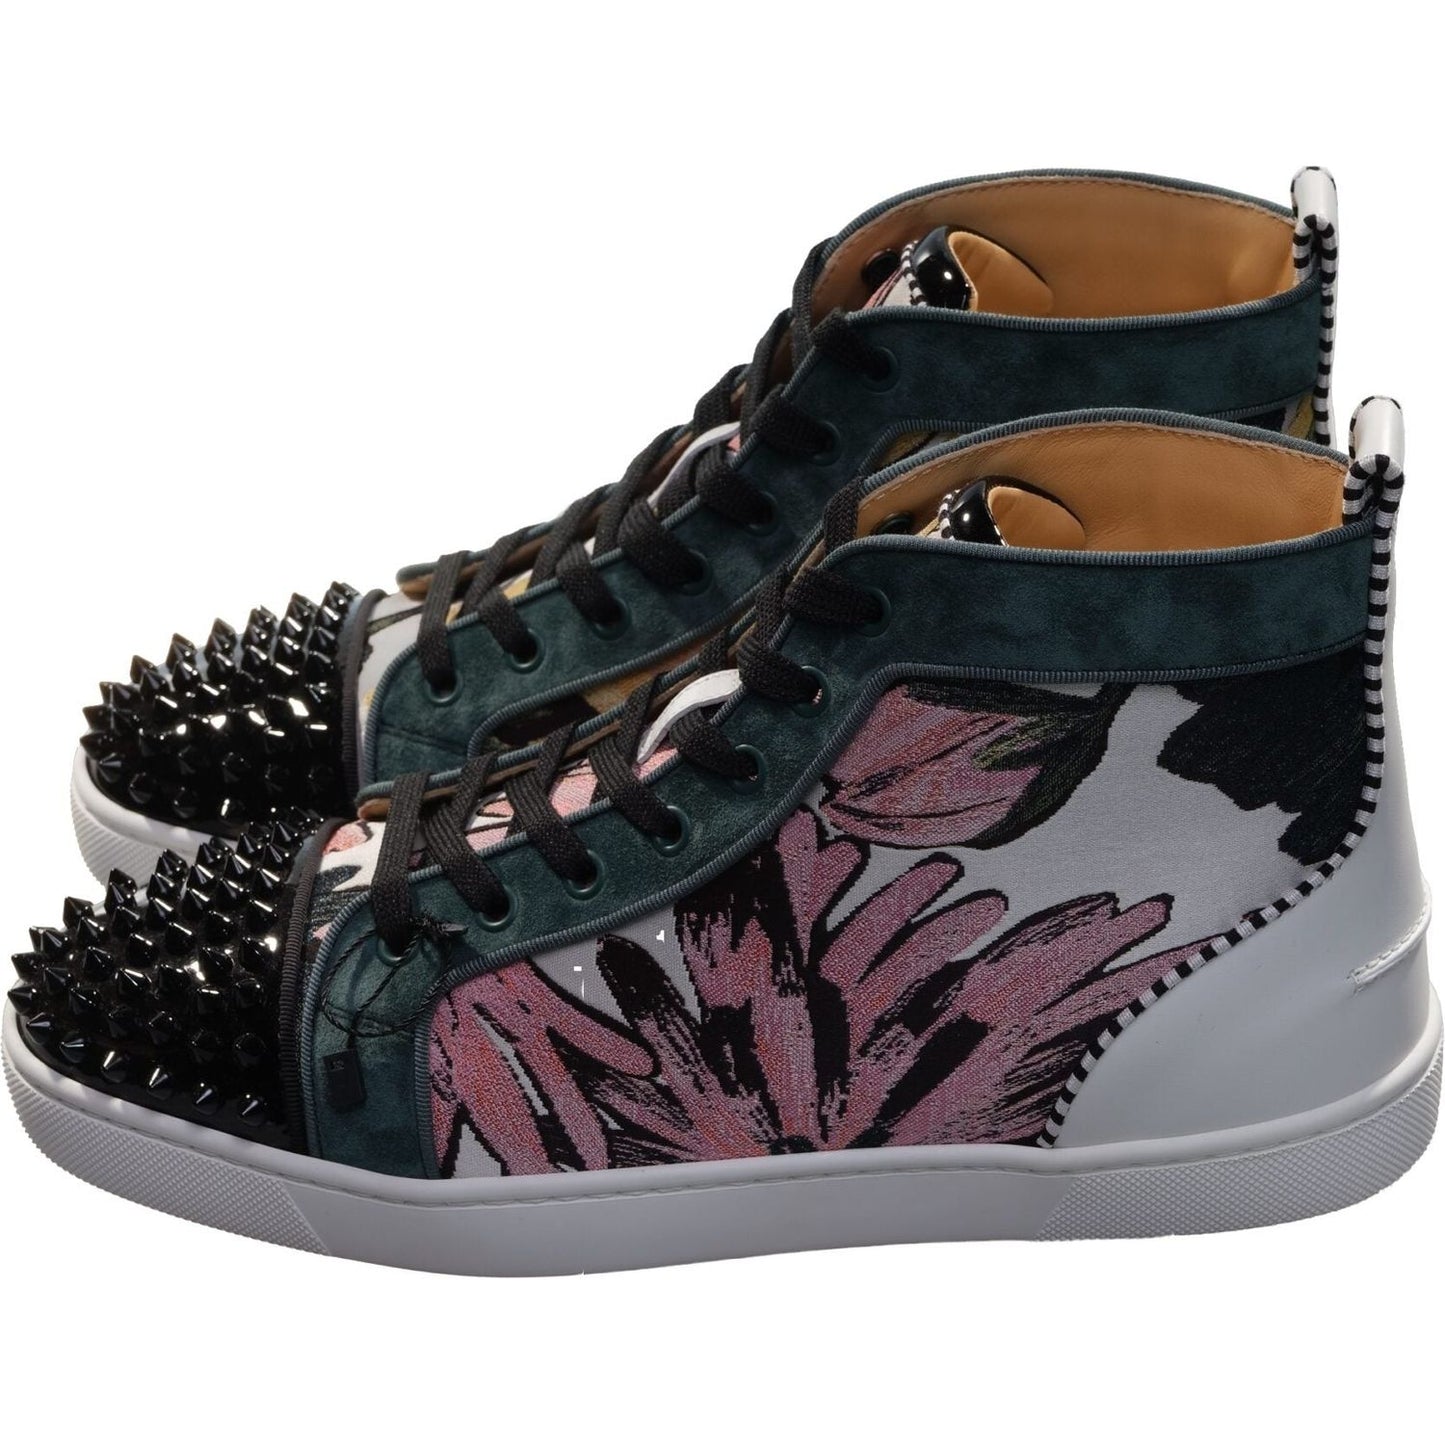 Louis Spikes Orlato Flat Printed Fabric Patterned High Top Sneakers